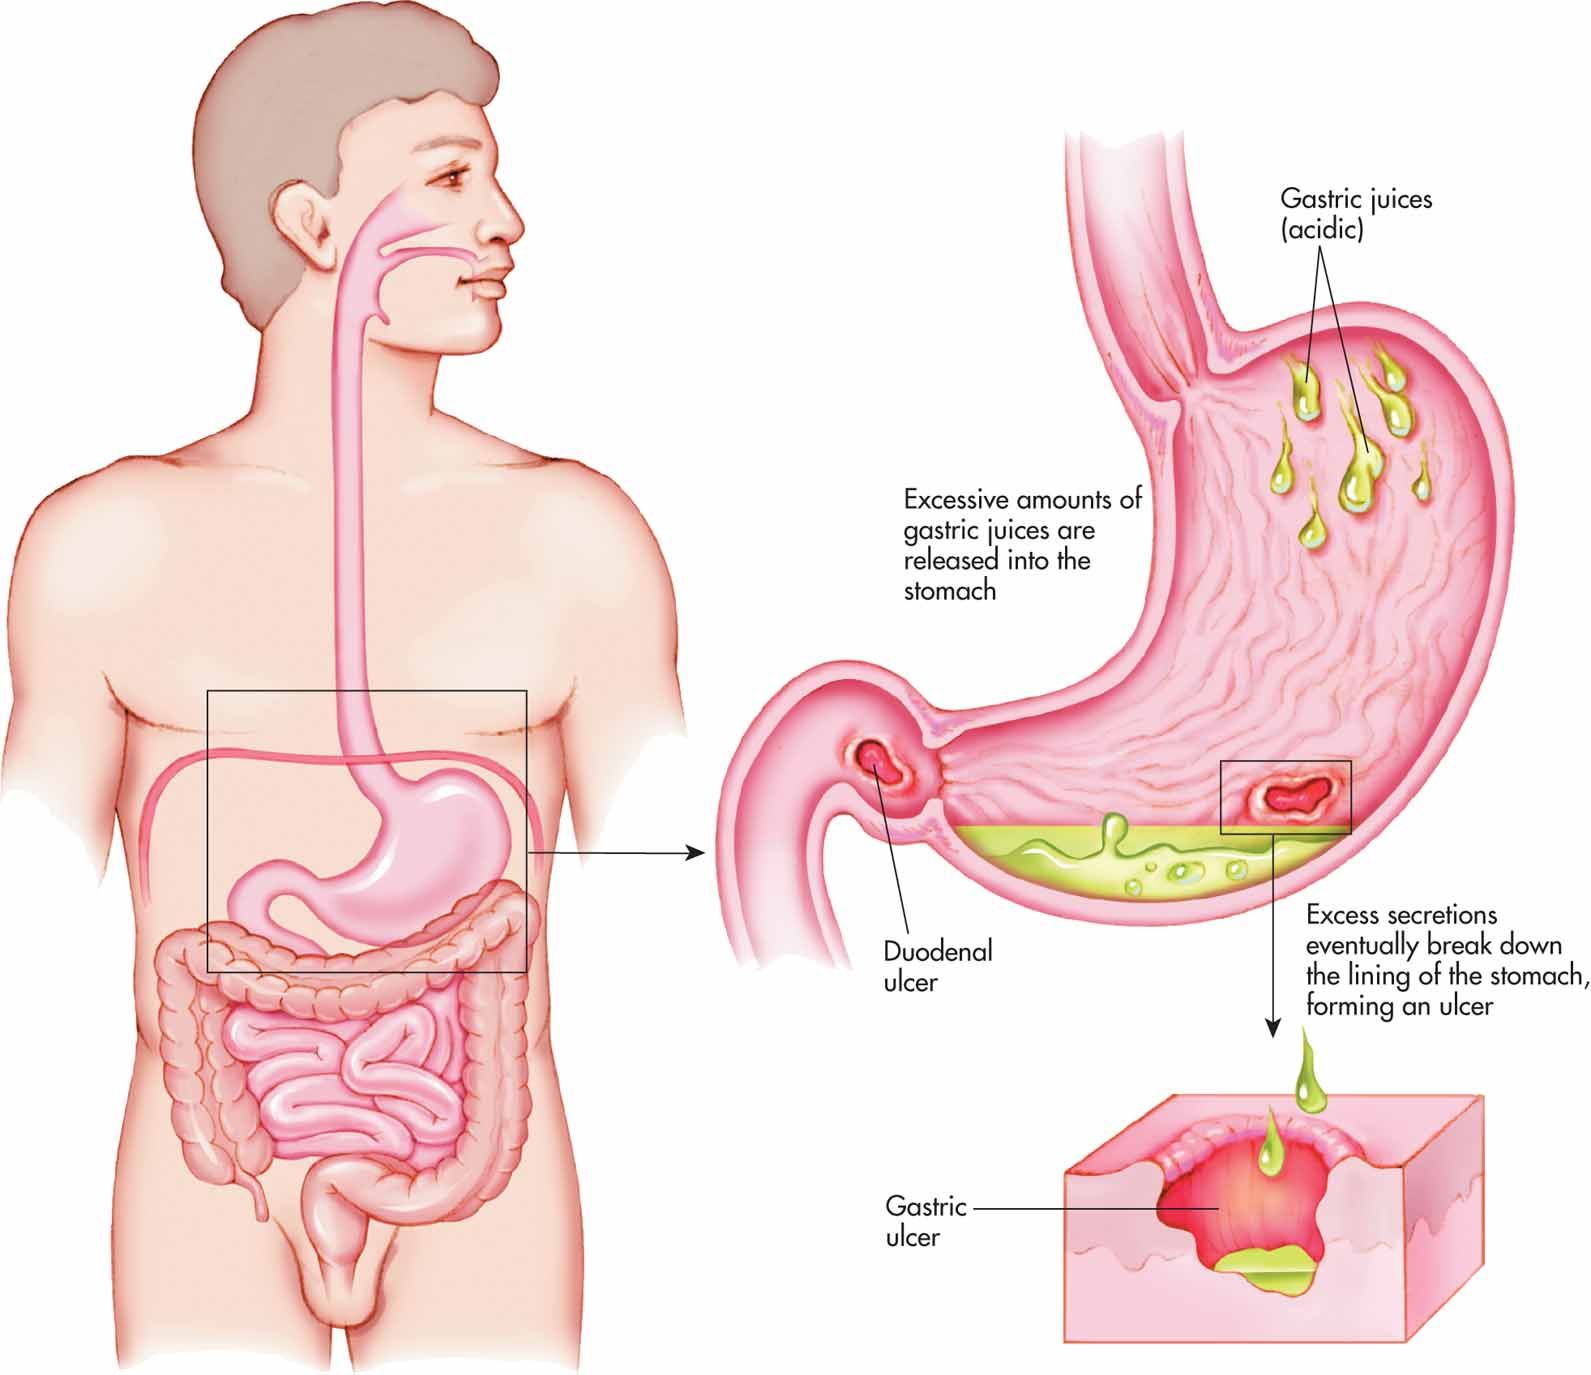 Peptic Ulcer Surgery: The procedure, risks, complications, preparations ...